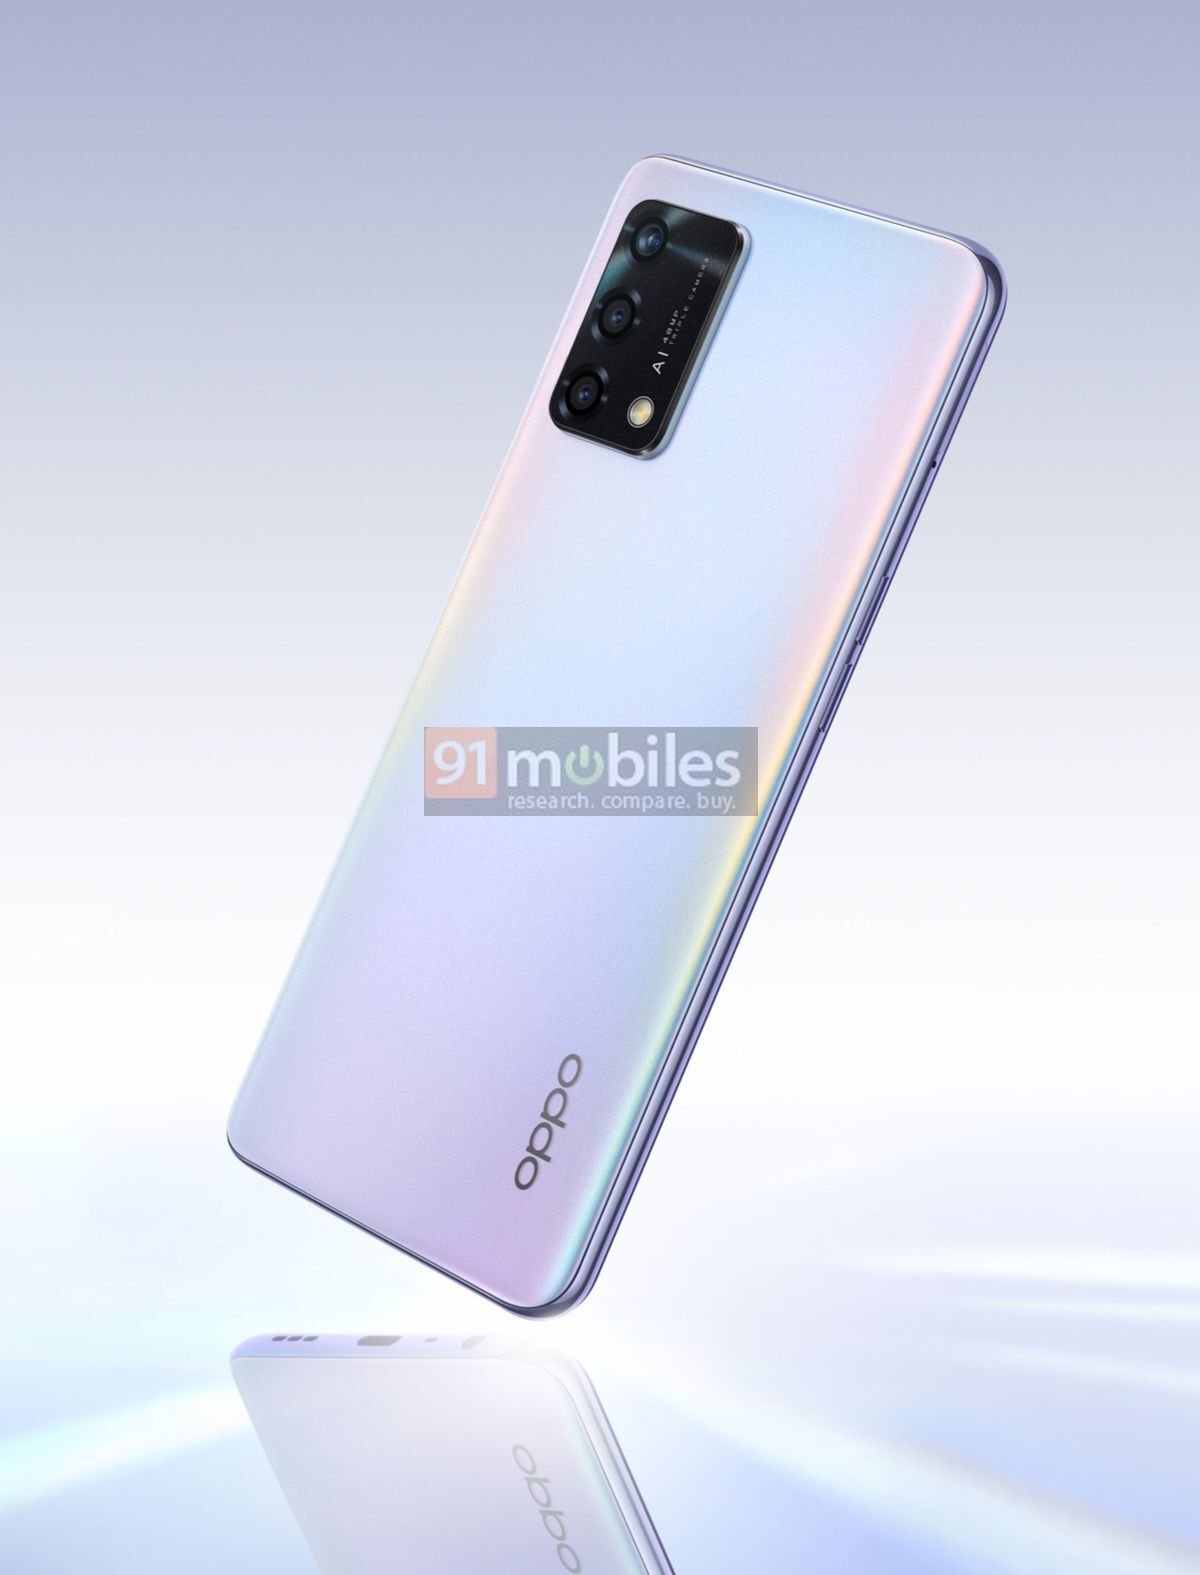 High-quality press images of OPPO A95 have appeared online-4